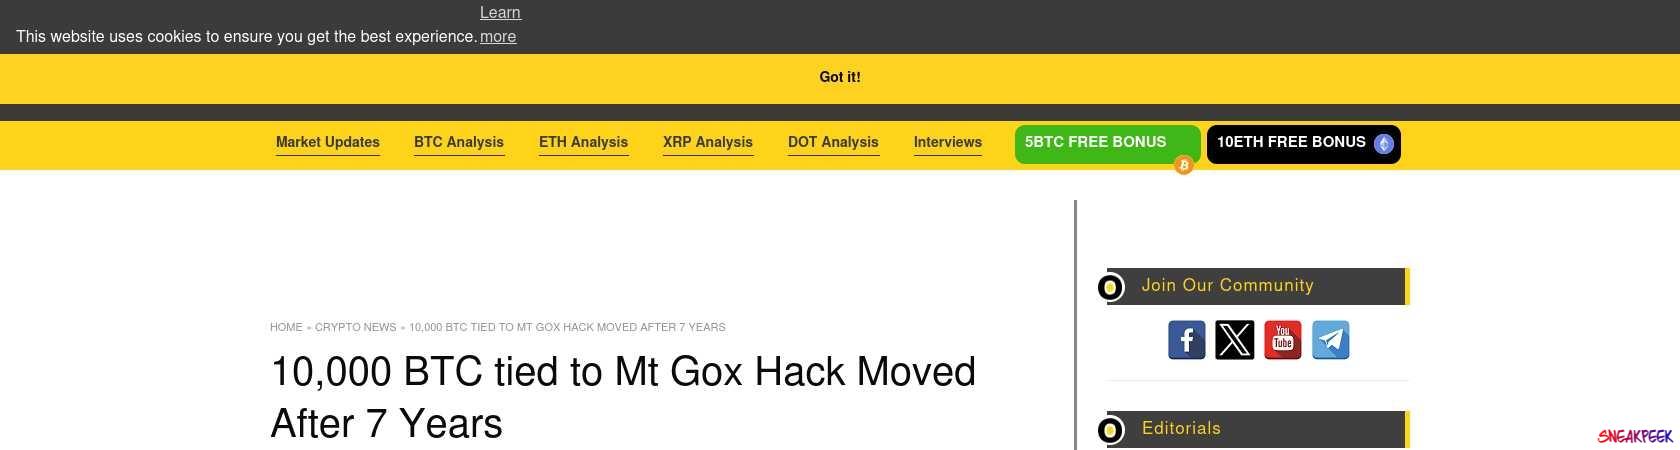 Read the full Article:  ⭲ 10,000 BTC tied to Mt Gox Hack Moved After 7 Years